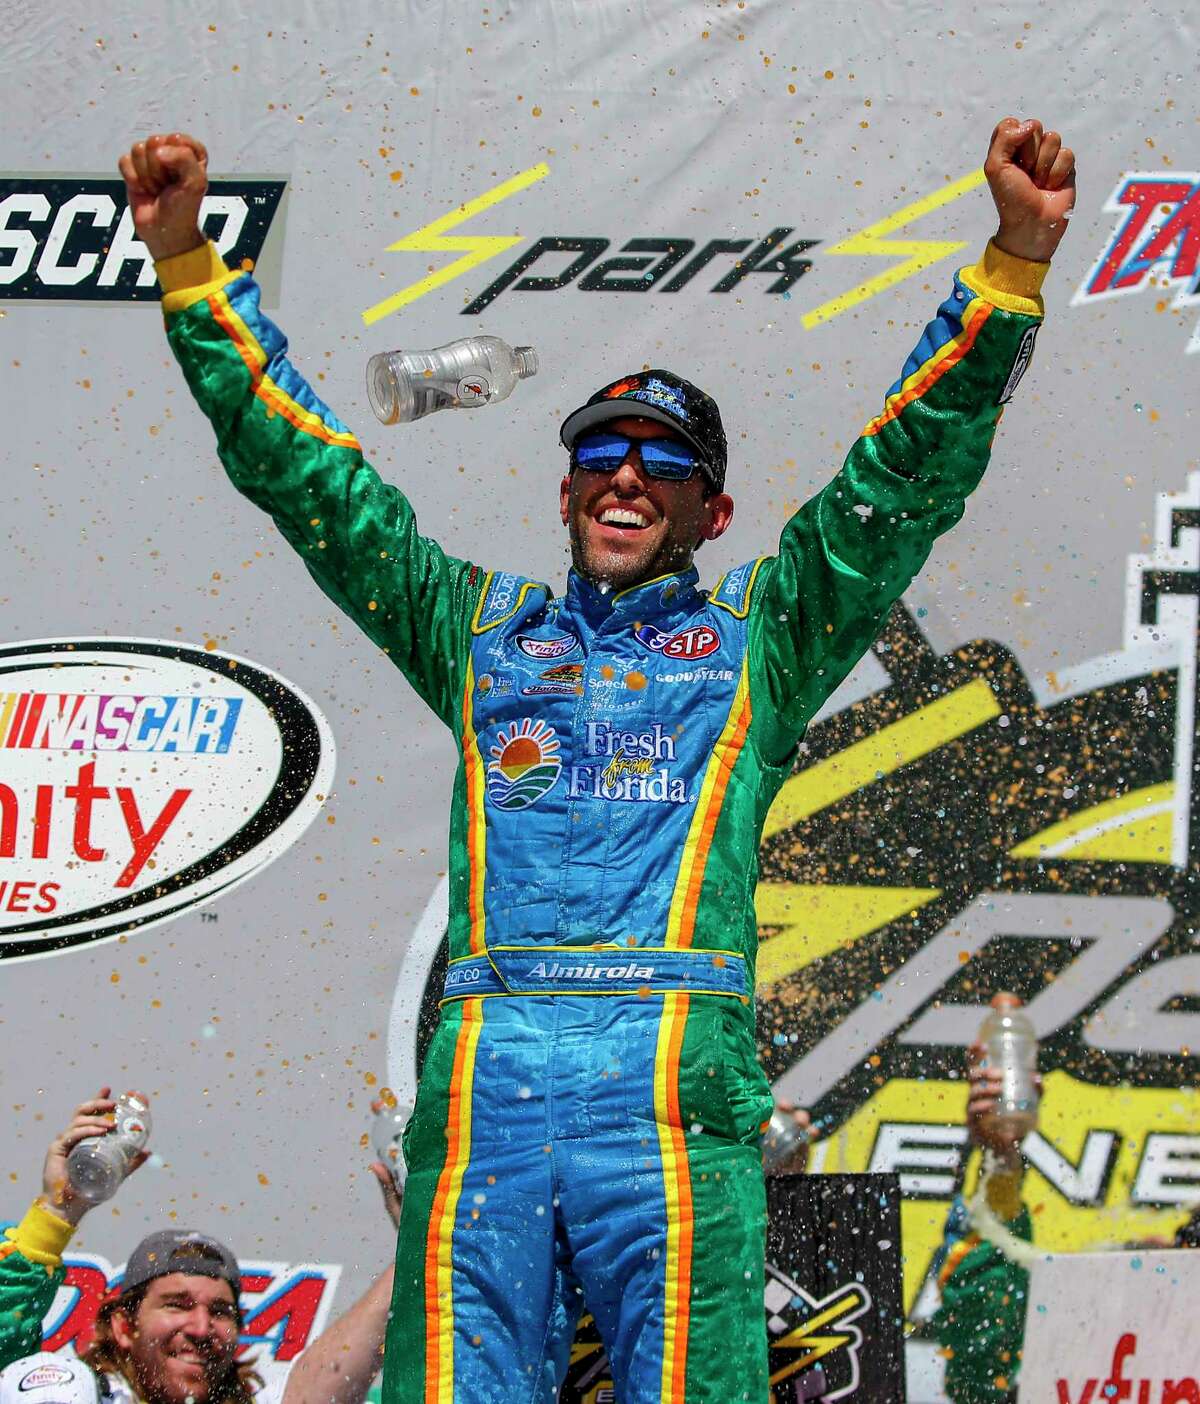 Aric Almirola celebrates in Victory Lane after winning the NASCAR Xfinity series auto race at Talladega Superspeedway, Saturday, May 6, 2017, in Talladega, Ala. (AP Photo/Butch Dill)